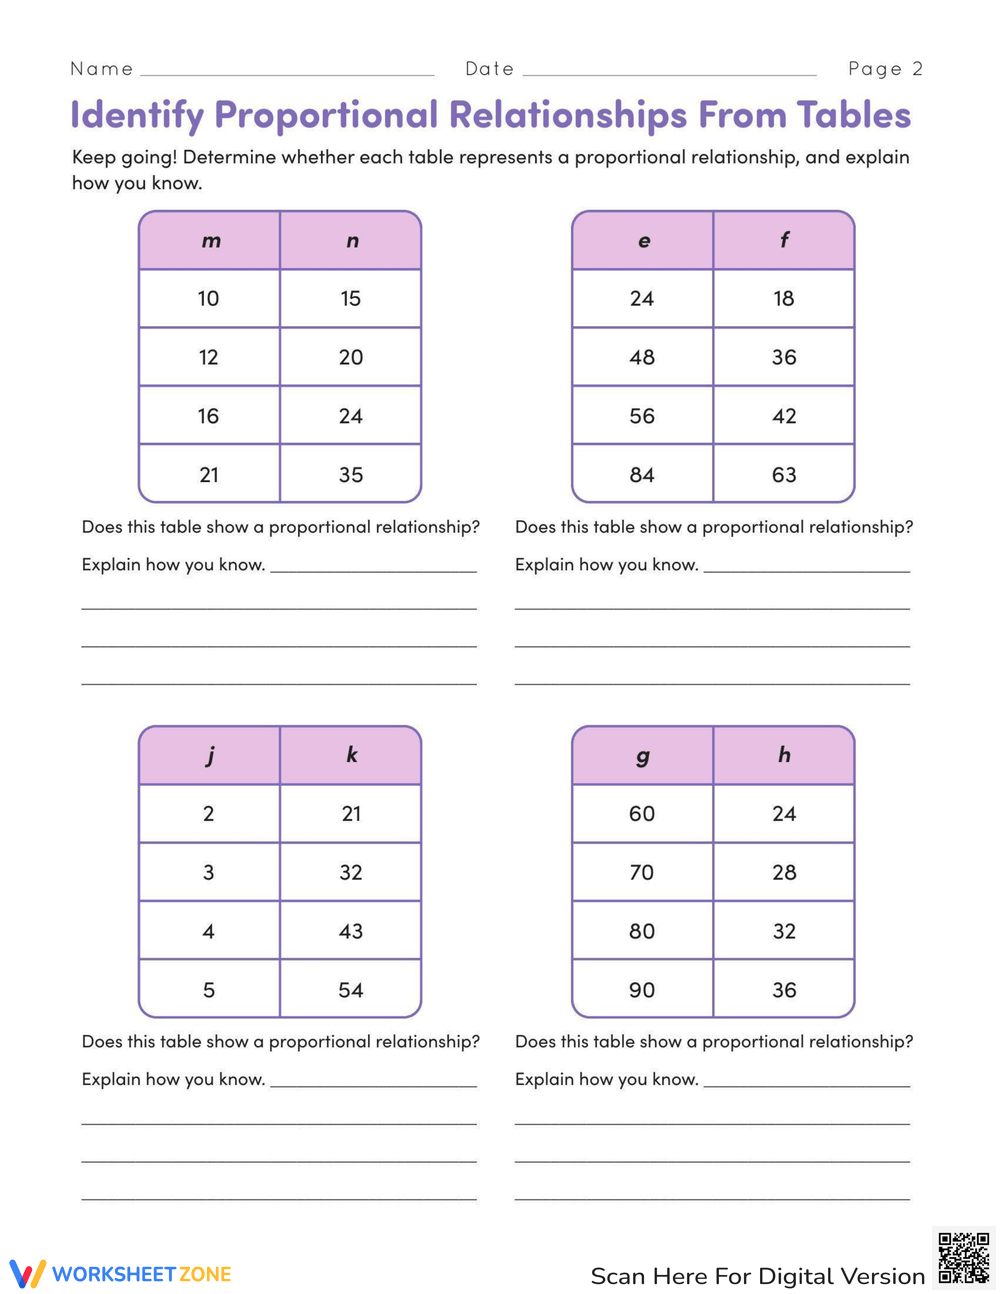 Identify Proportional Relationships From Tables